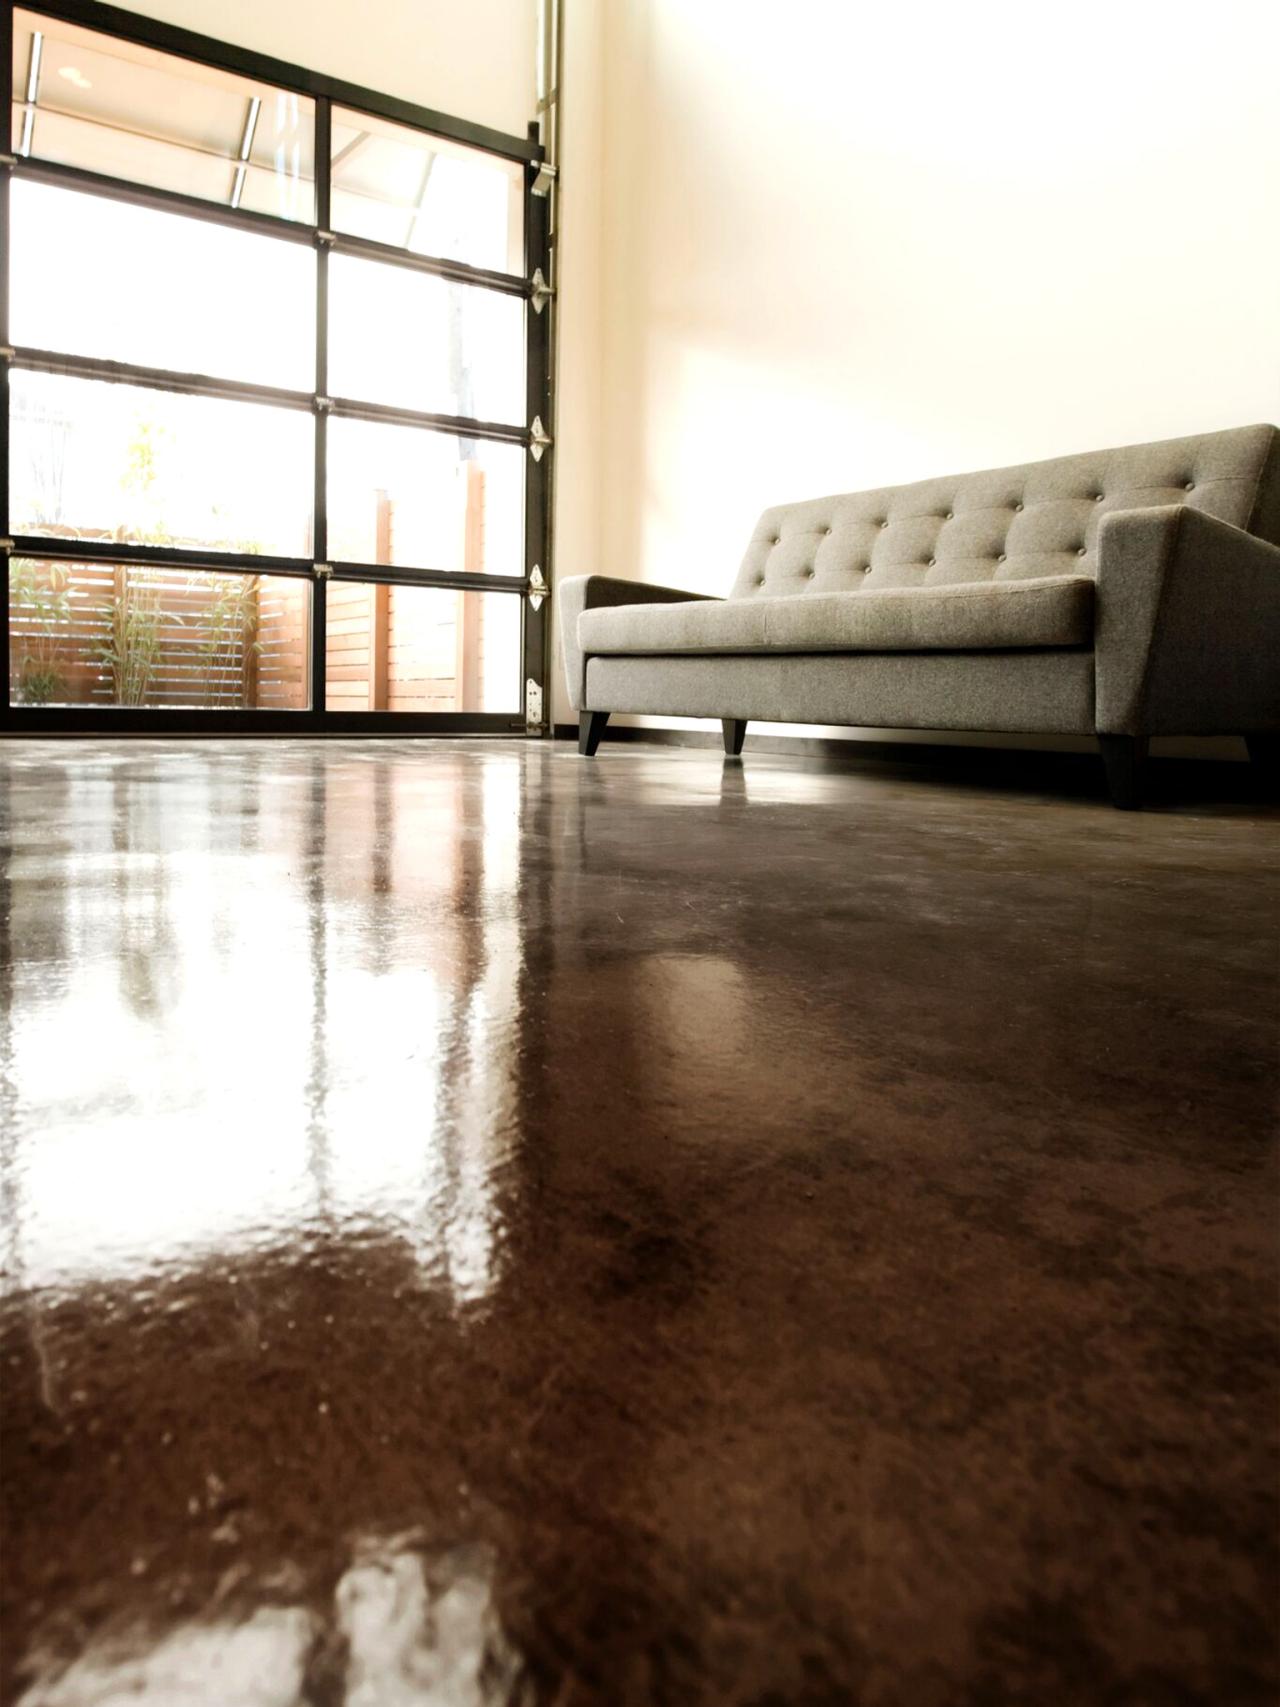 How To Apply An Acid Stain Look Concrete Flooring Hgtv